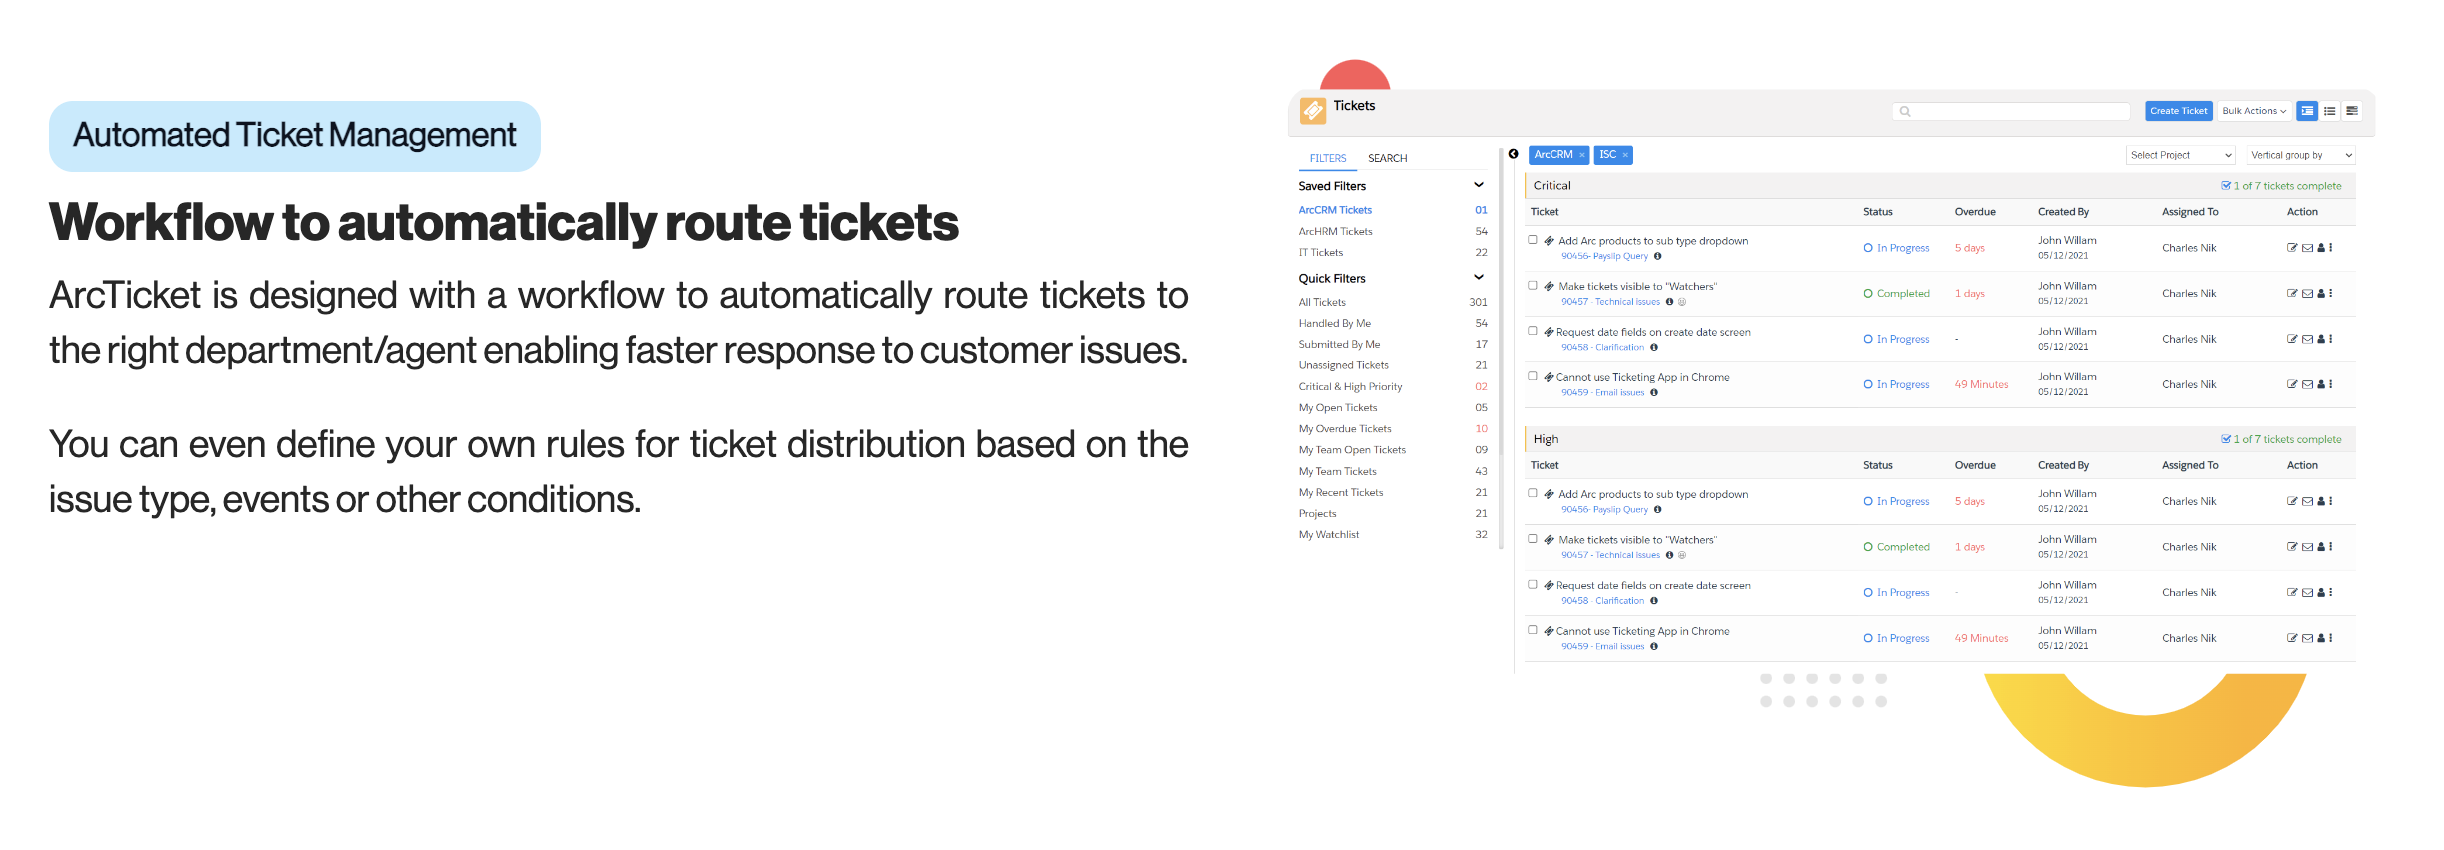 Automated ticket management